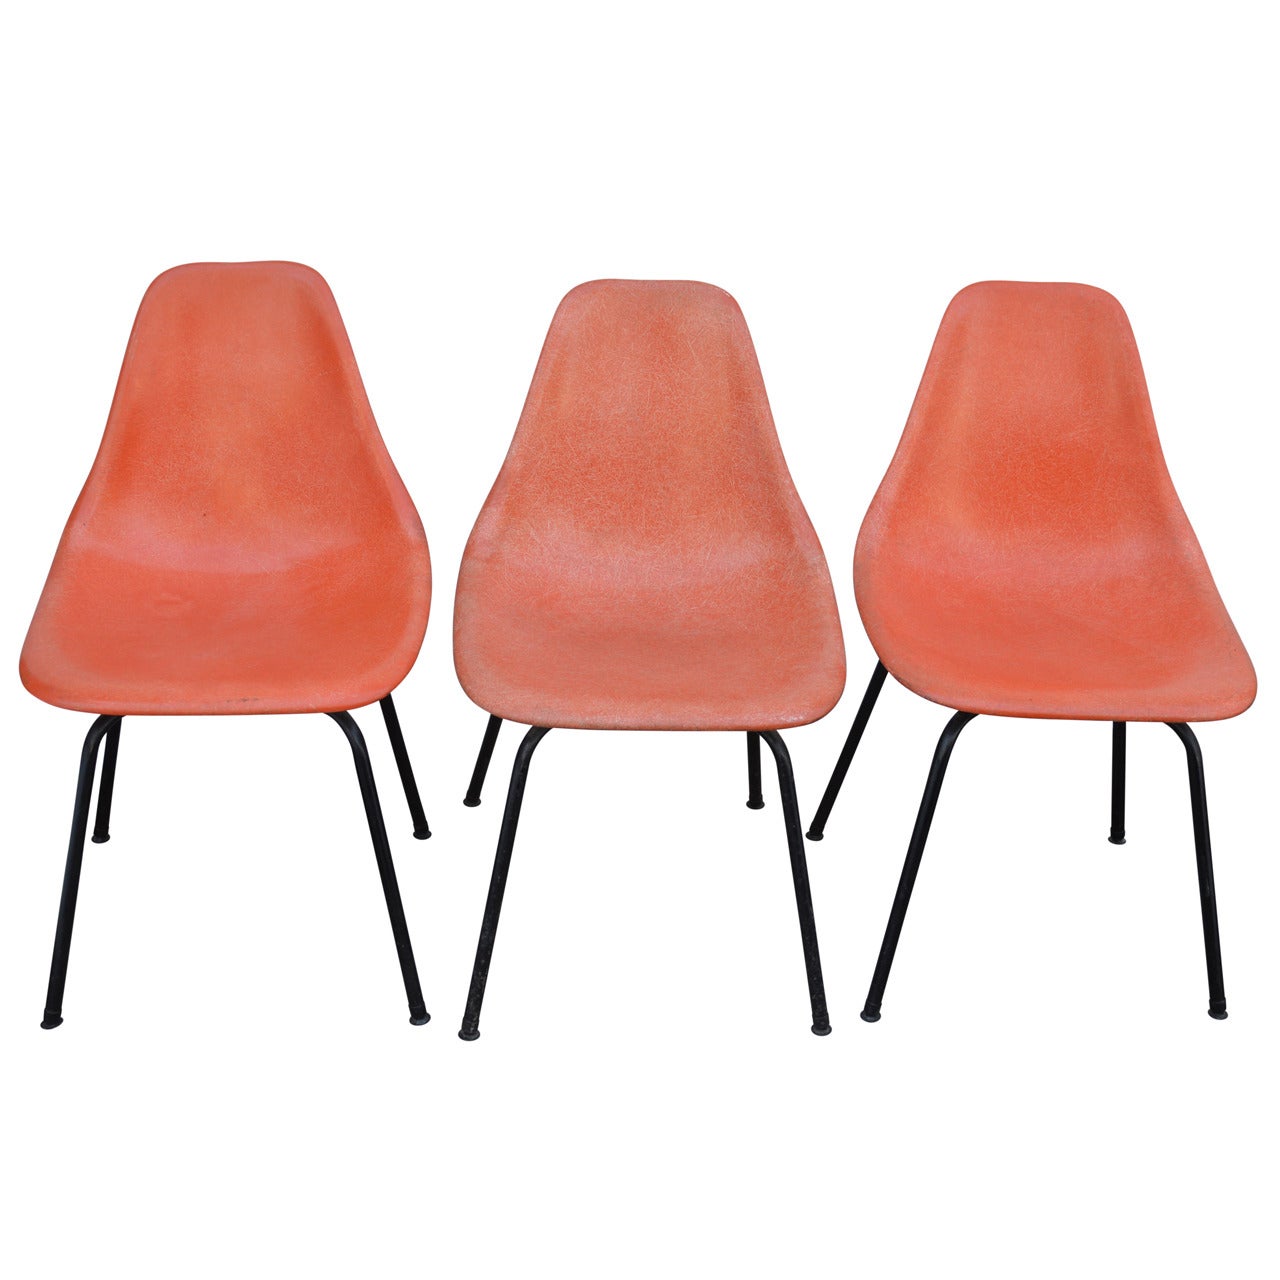 3 Dining Chairs in Charles Eames Manner